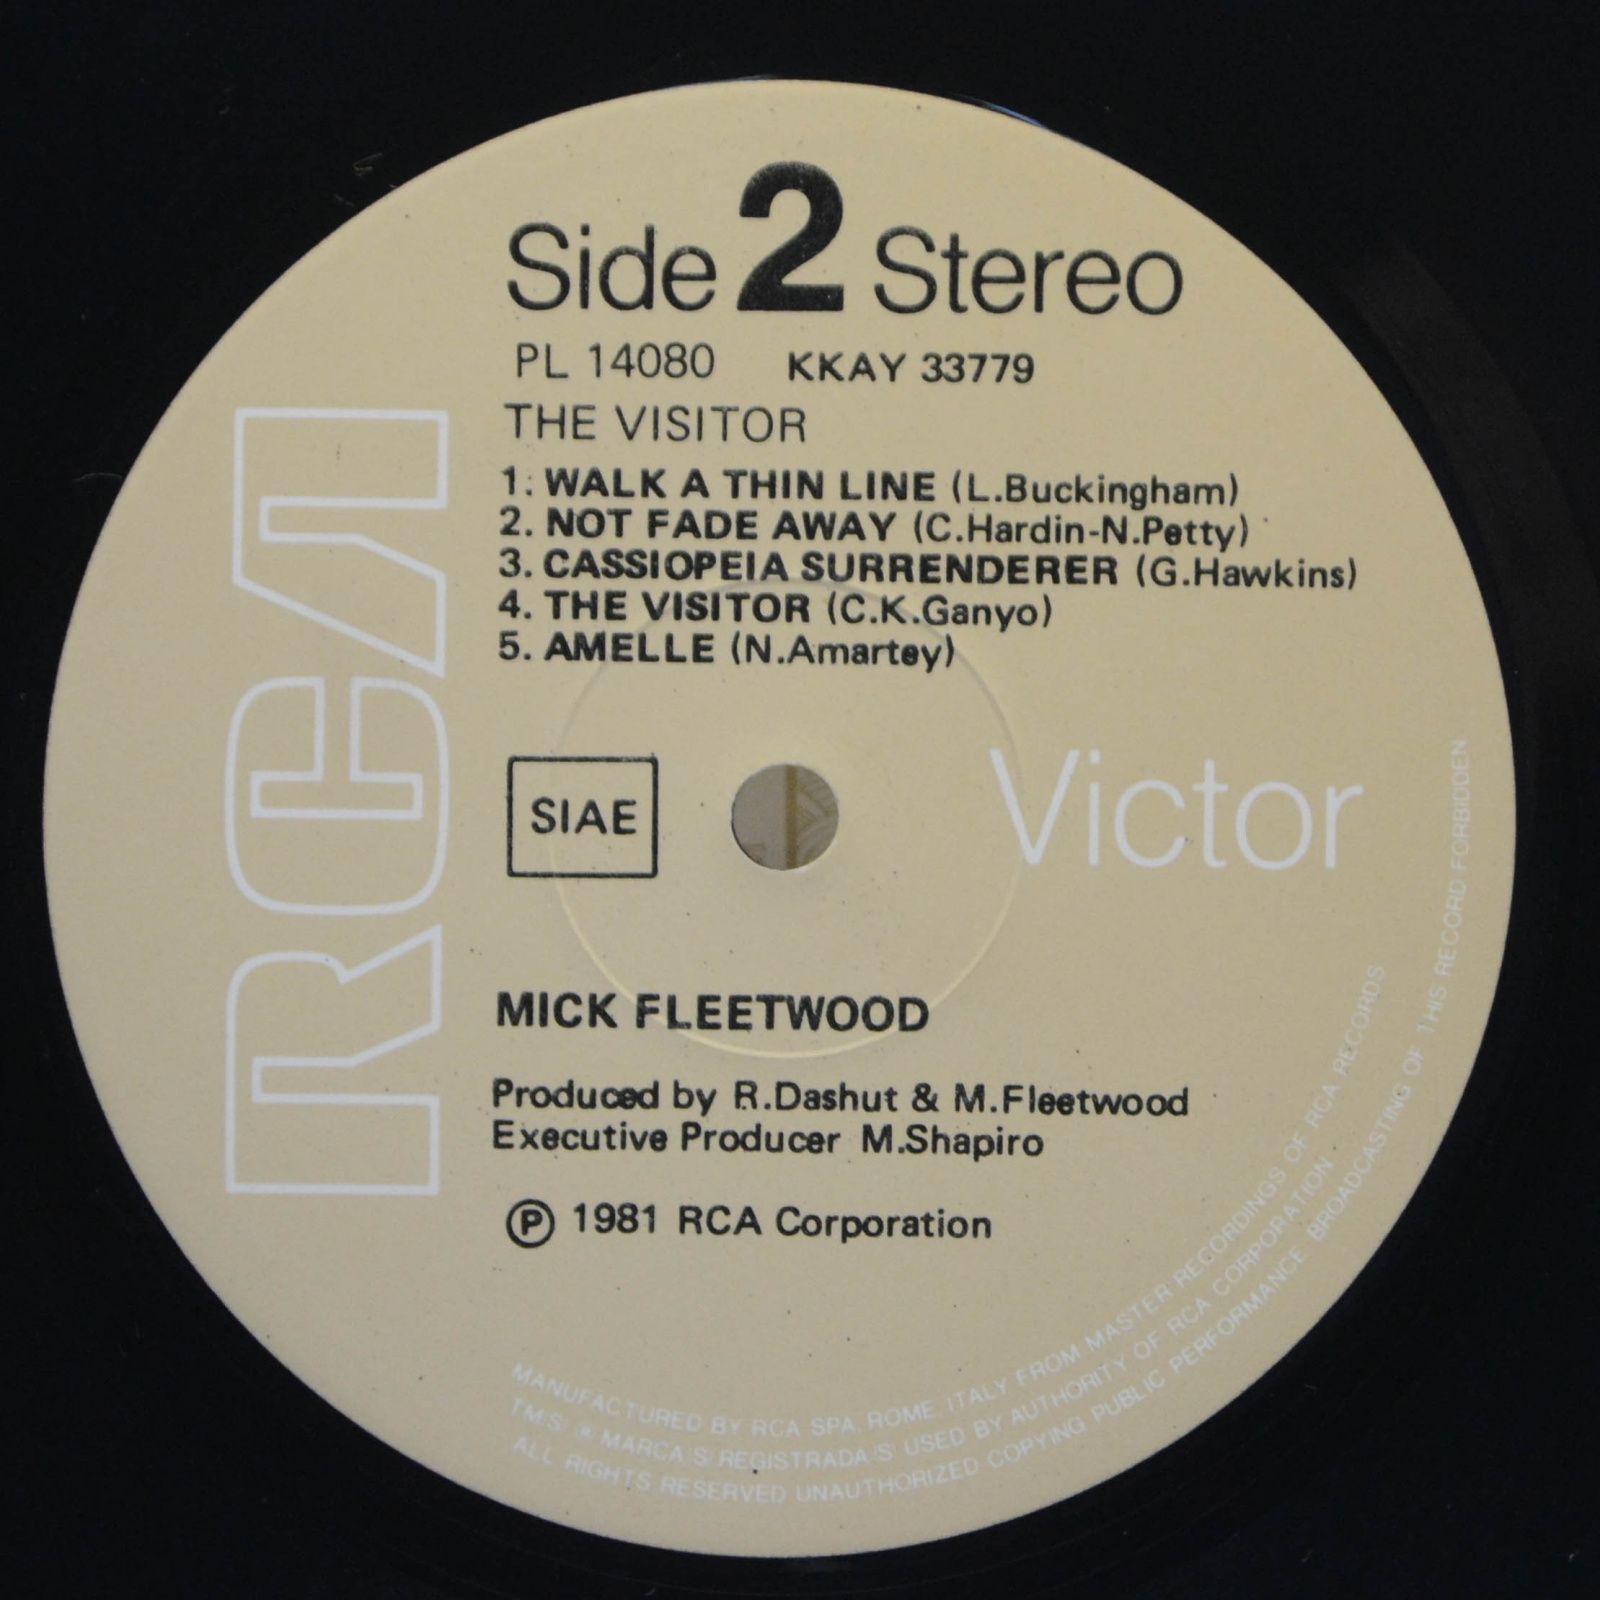 Mick Fleetwood — The Visitor, 1981